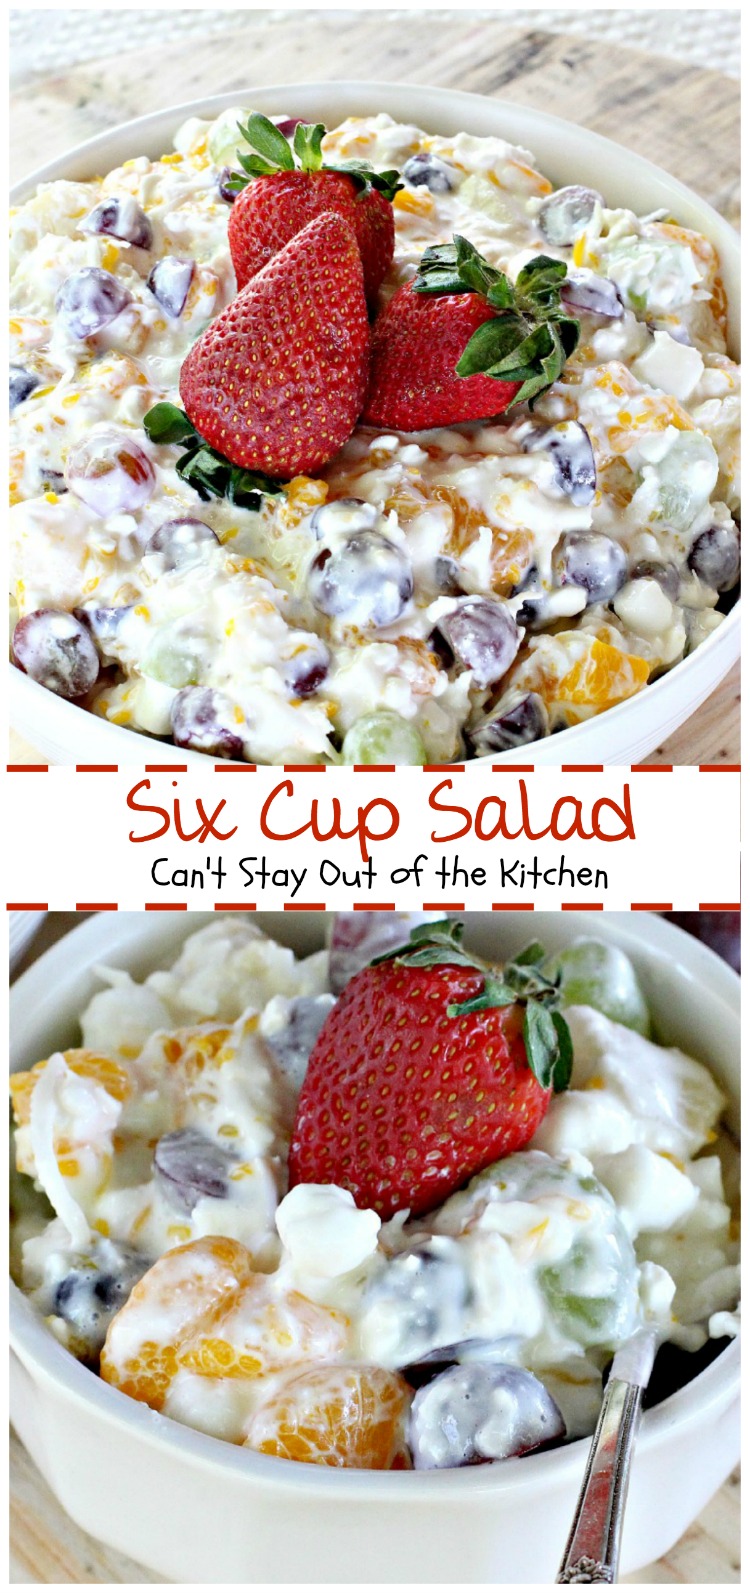 Six Cup Salad | Can't Stay Out of the Kitchen